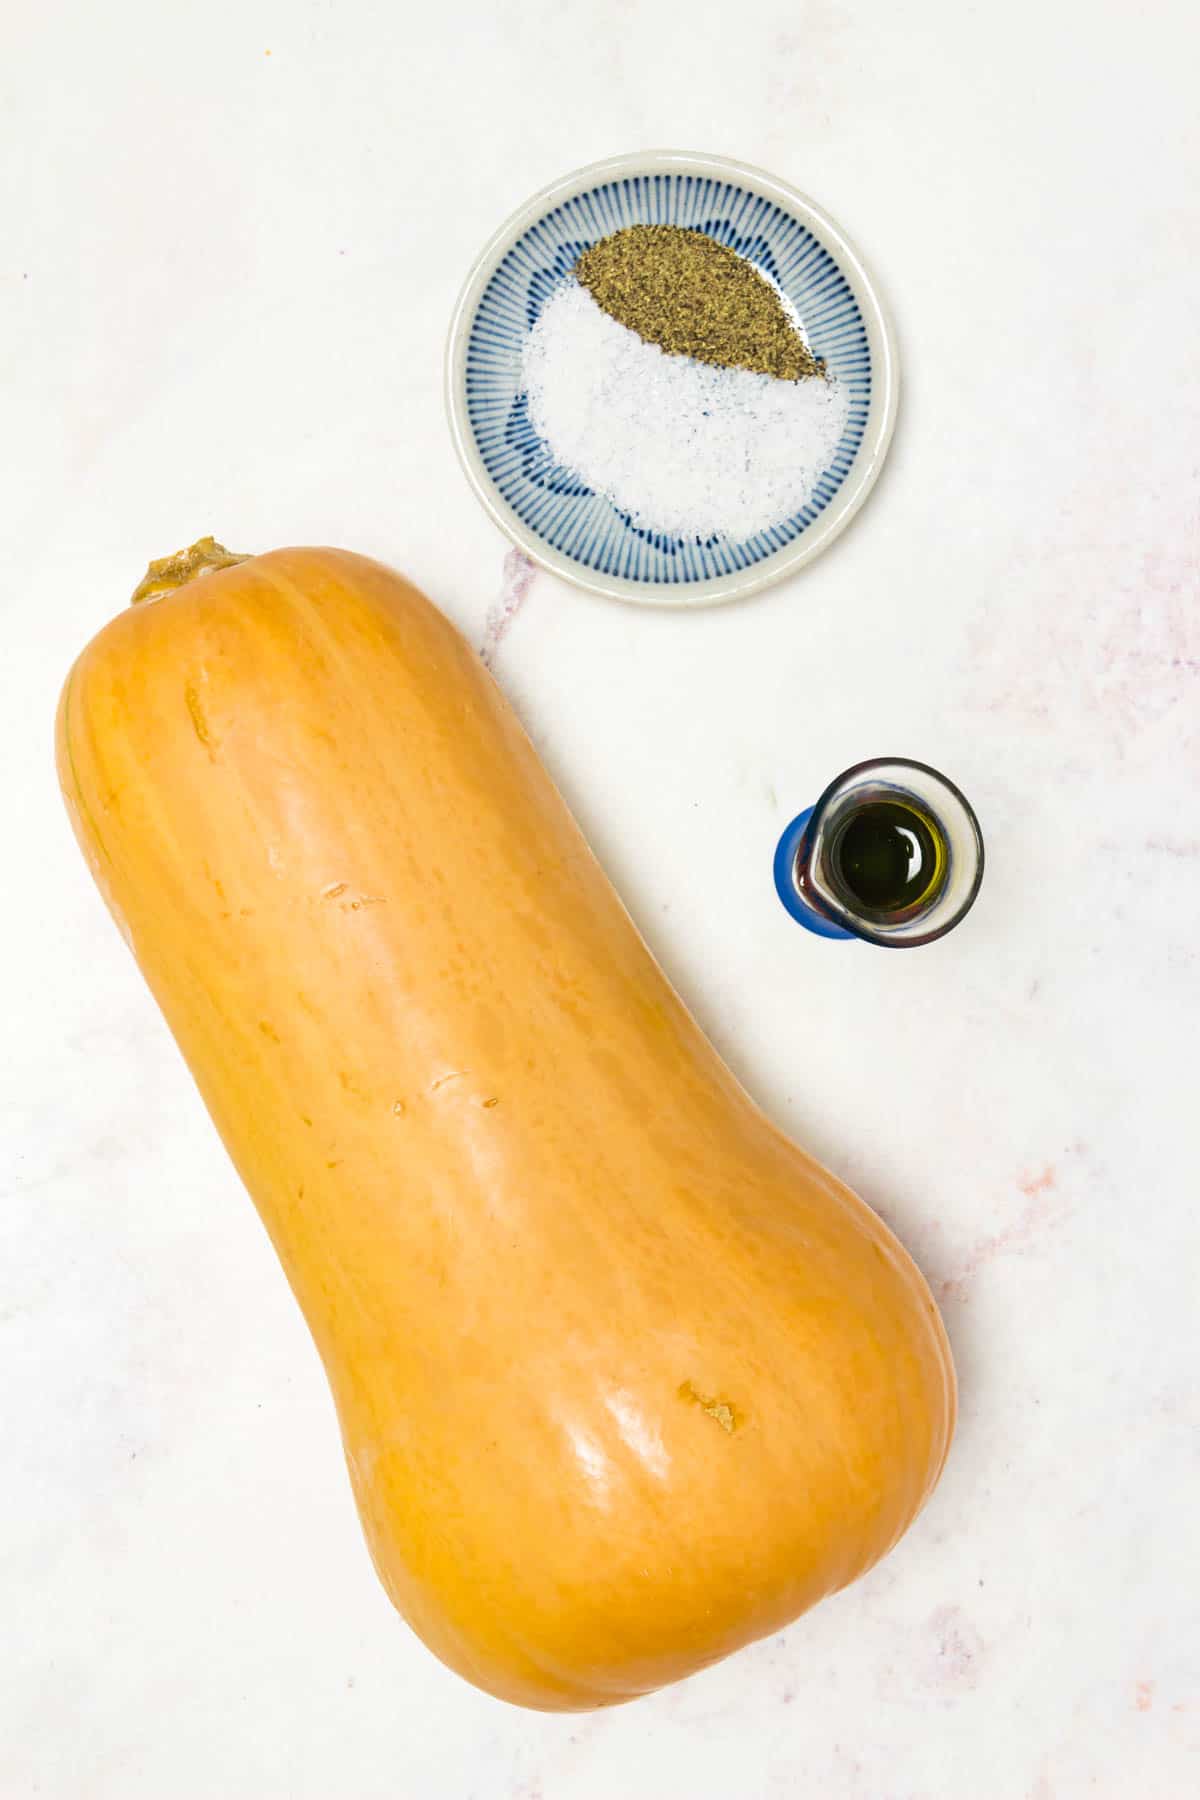 Ingredients needed for roasted butternut squash: butternut squash, olive oil, salt and pepper.